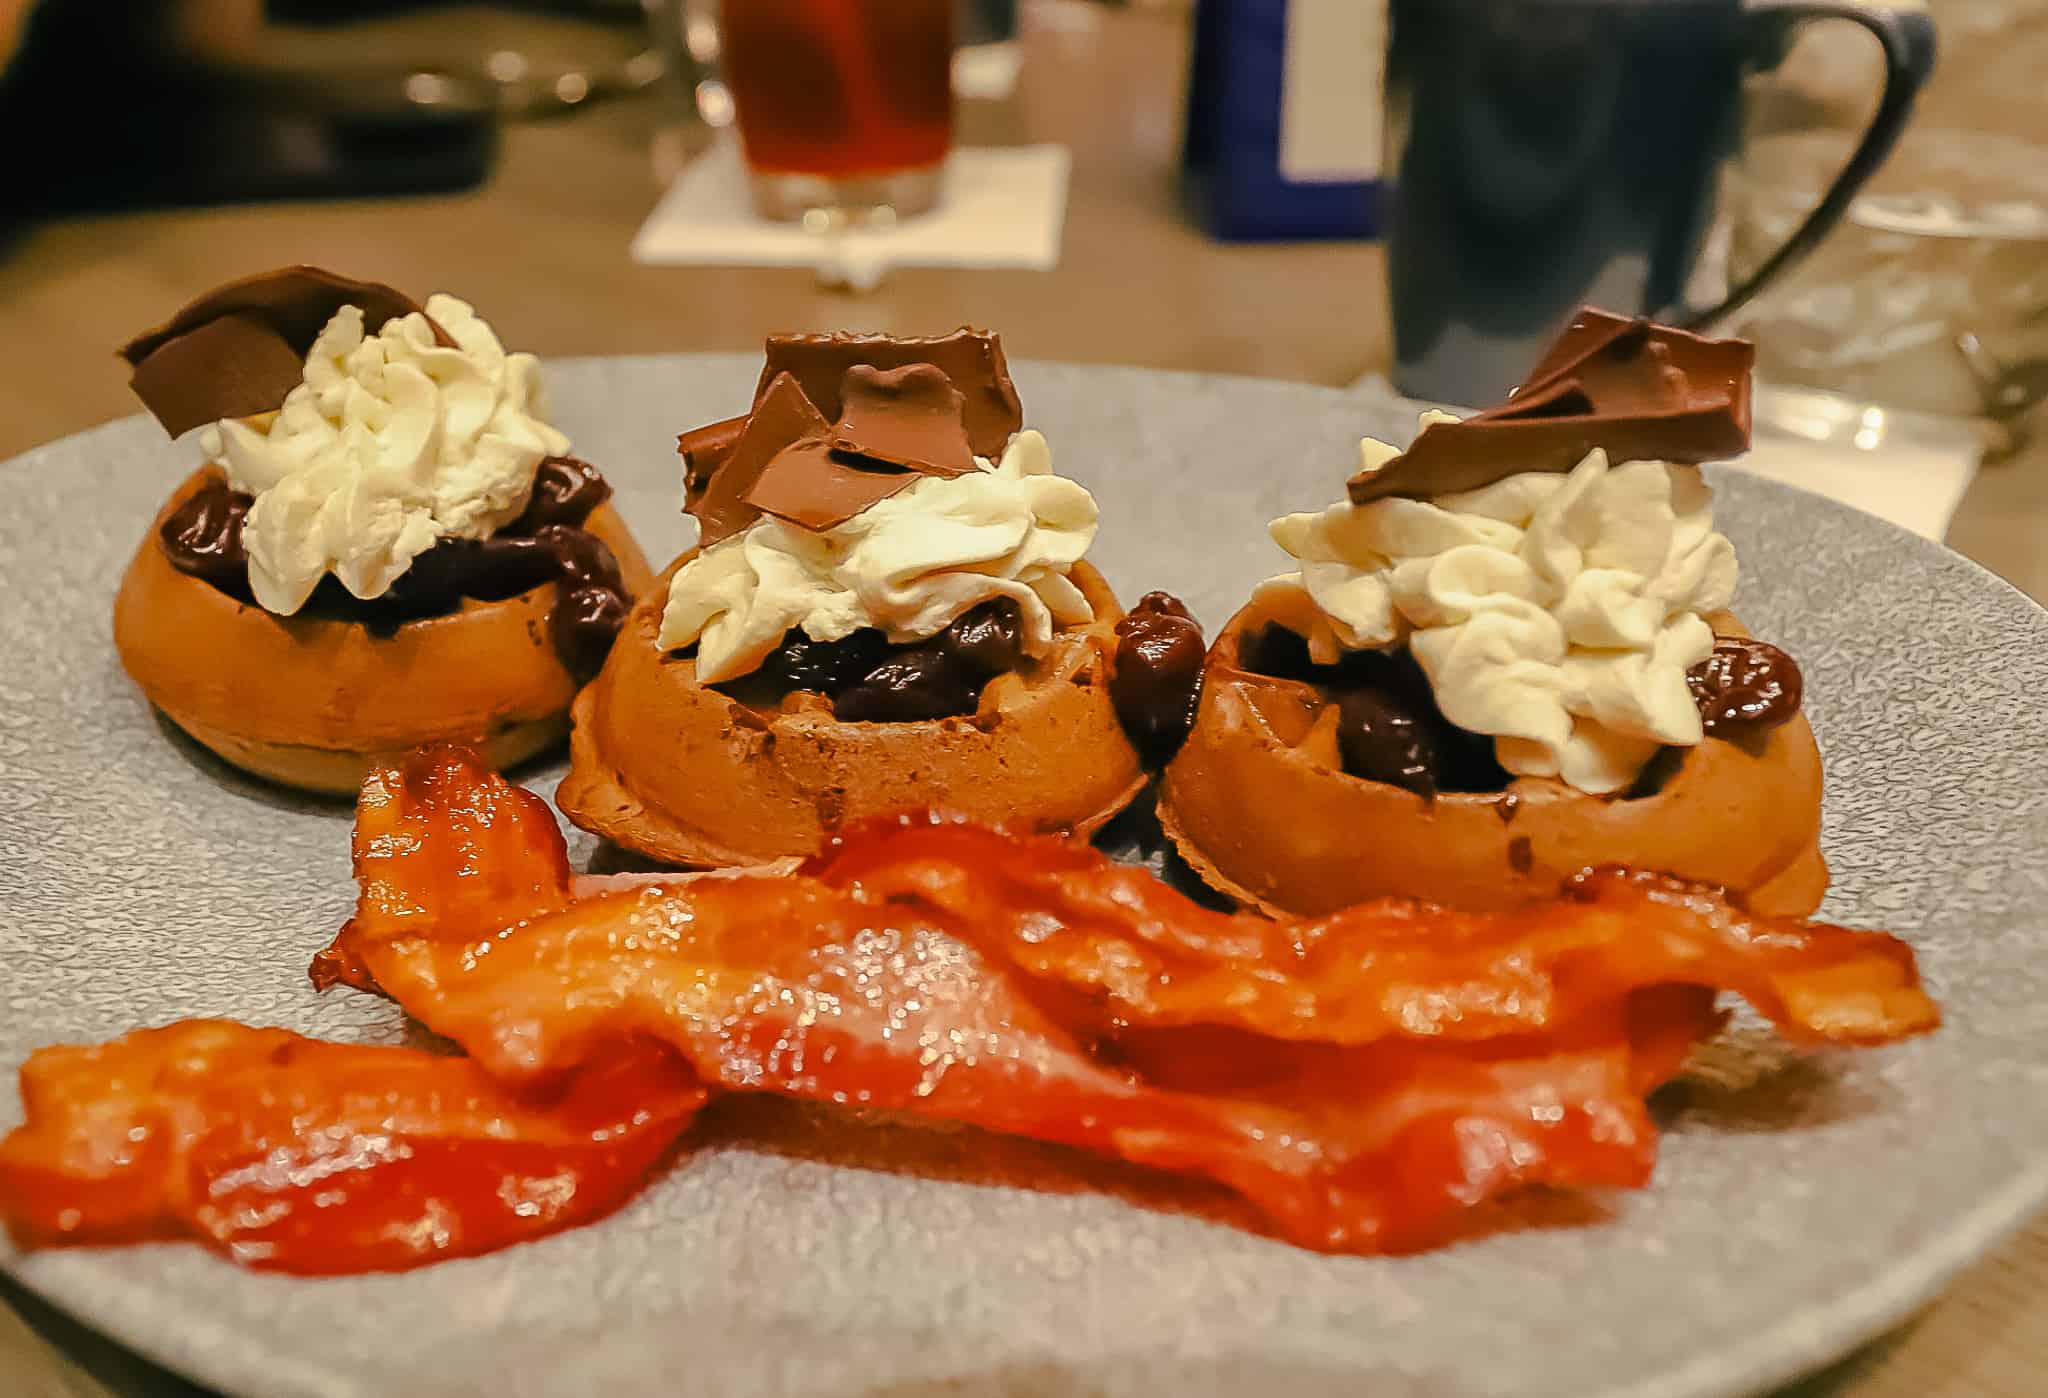 bacon and waffles with whip cream and chocolate shavings 